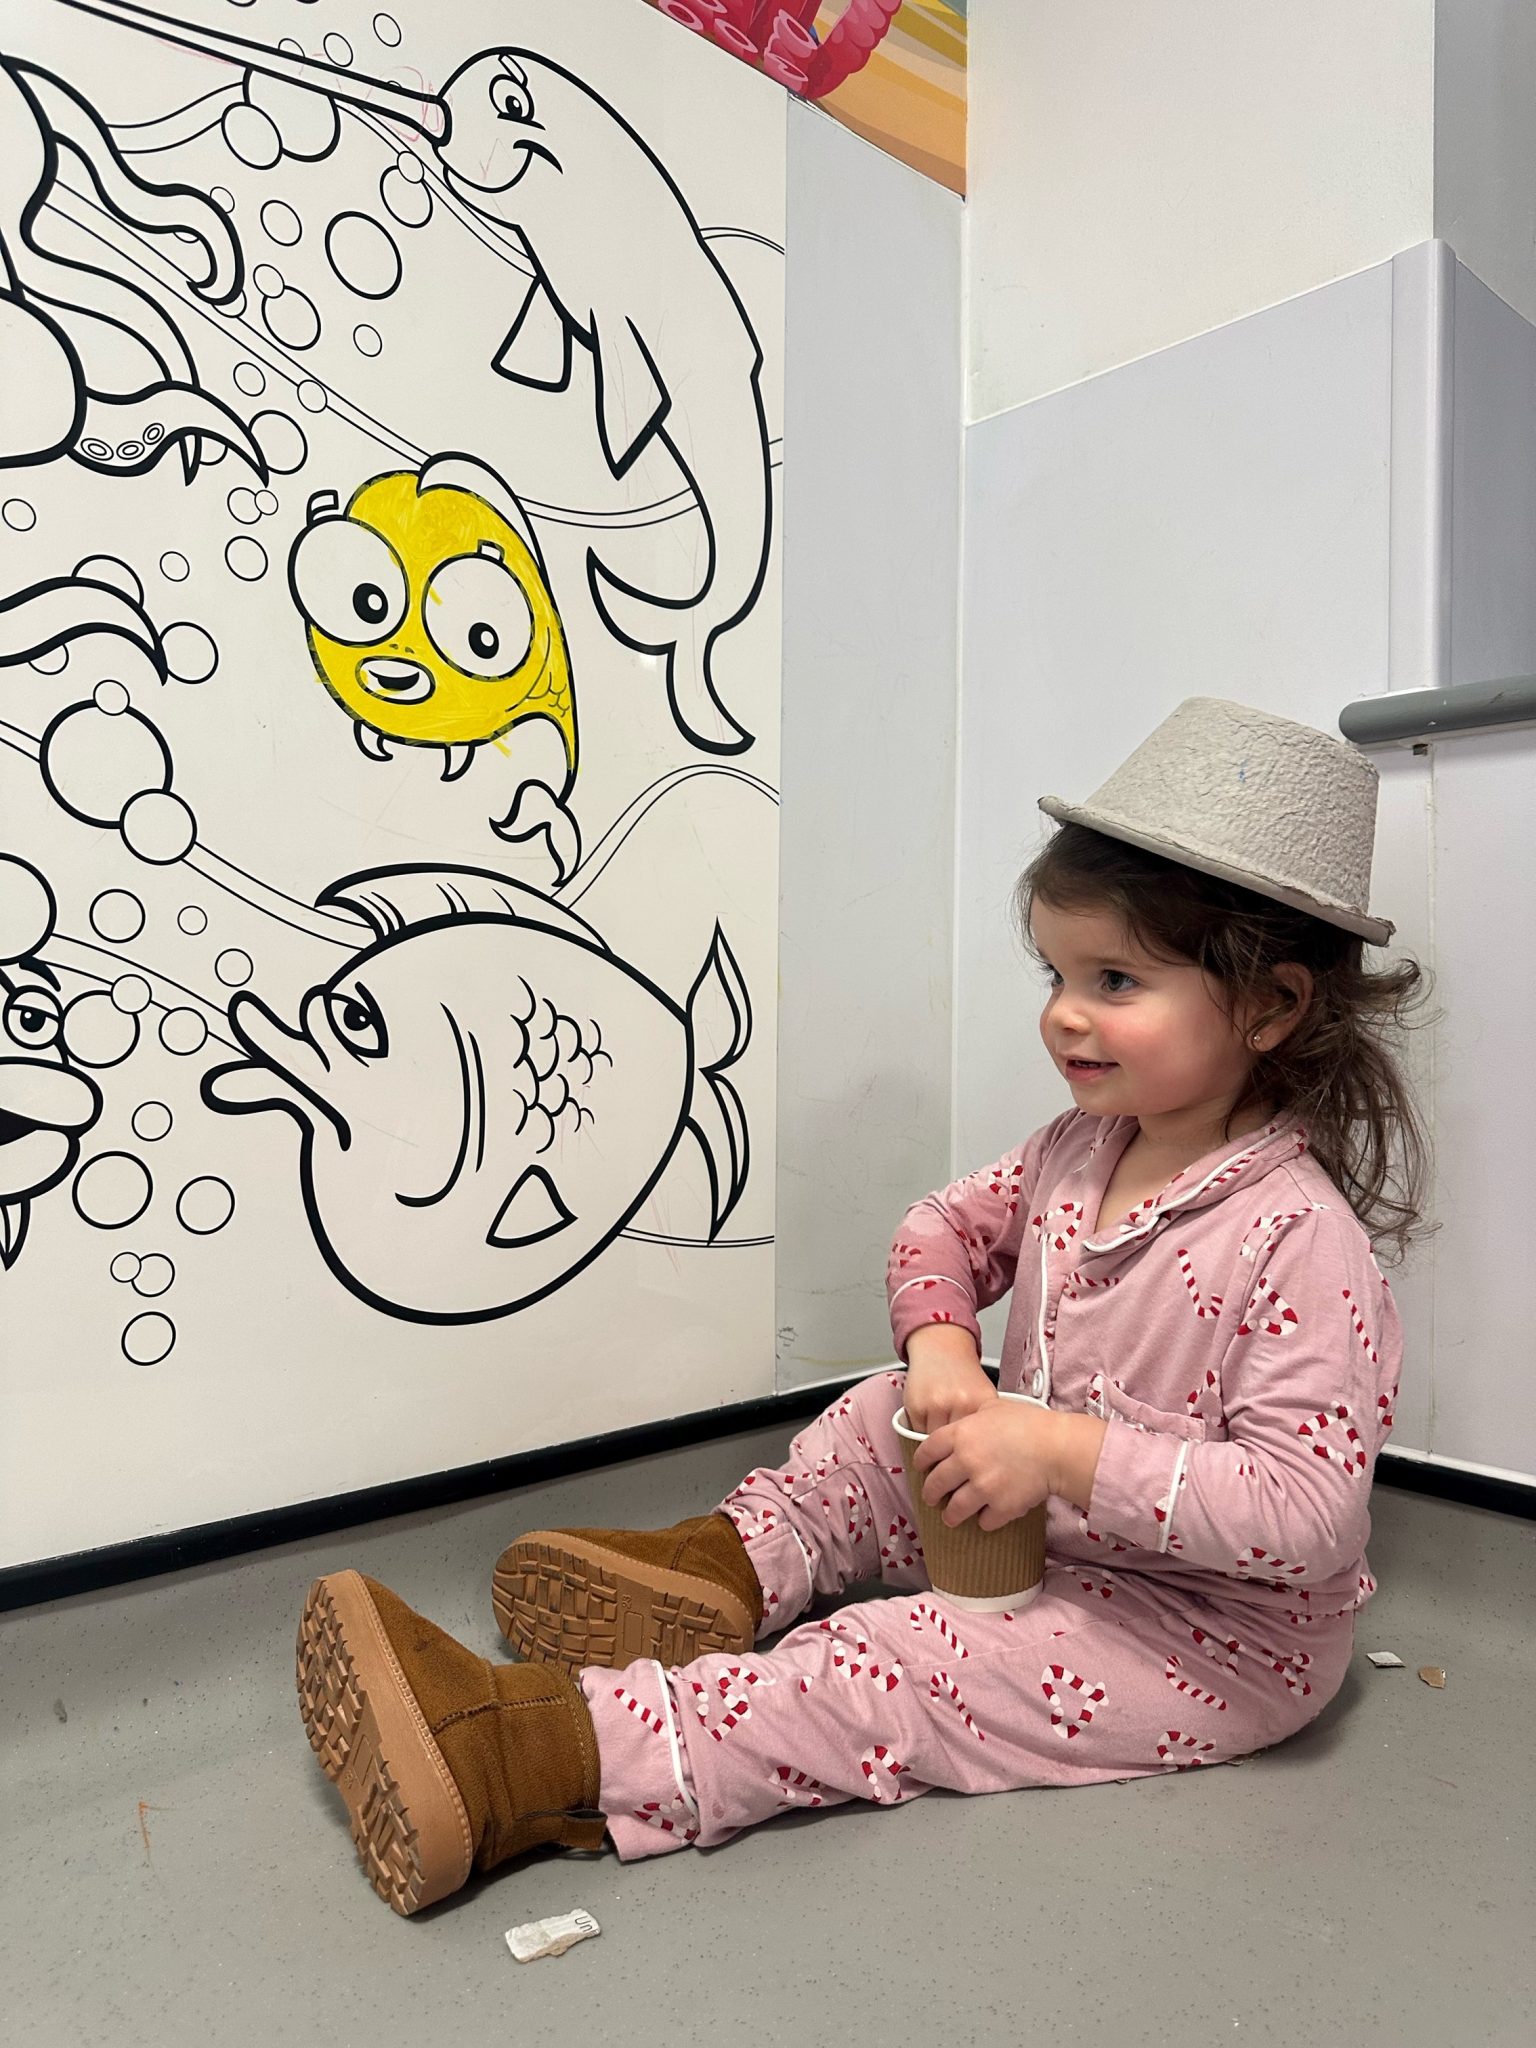 Autumn does some colouring in the Paediatric Emergency Department.